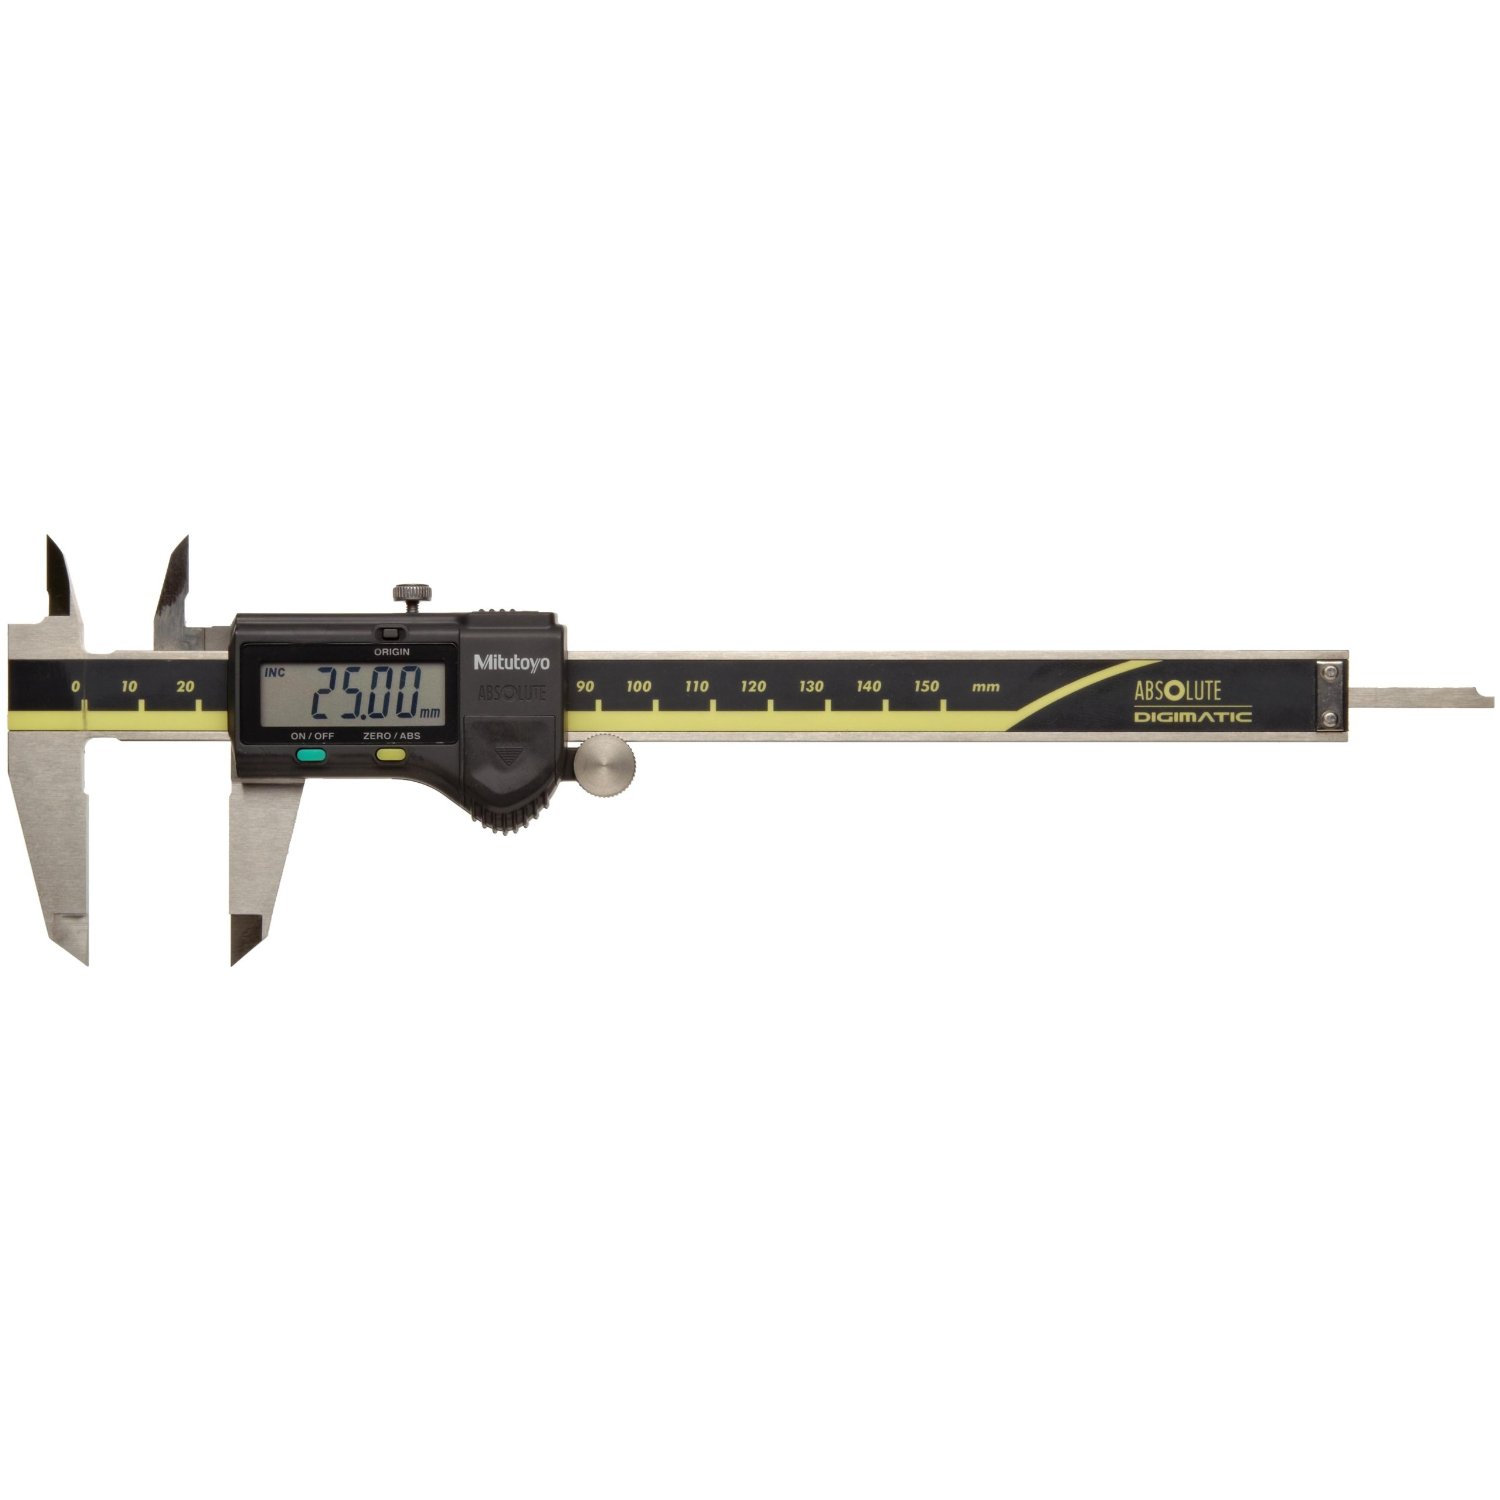 Absolute Digimatic Caliper Series 500 With Exclusive Absolute Encode